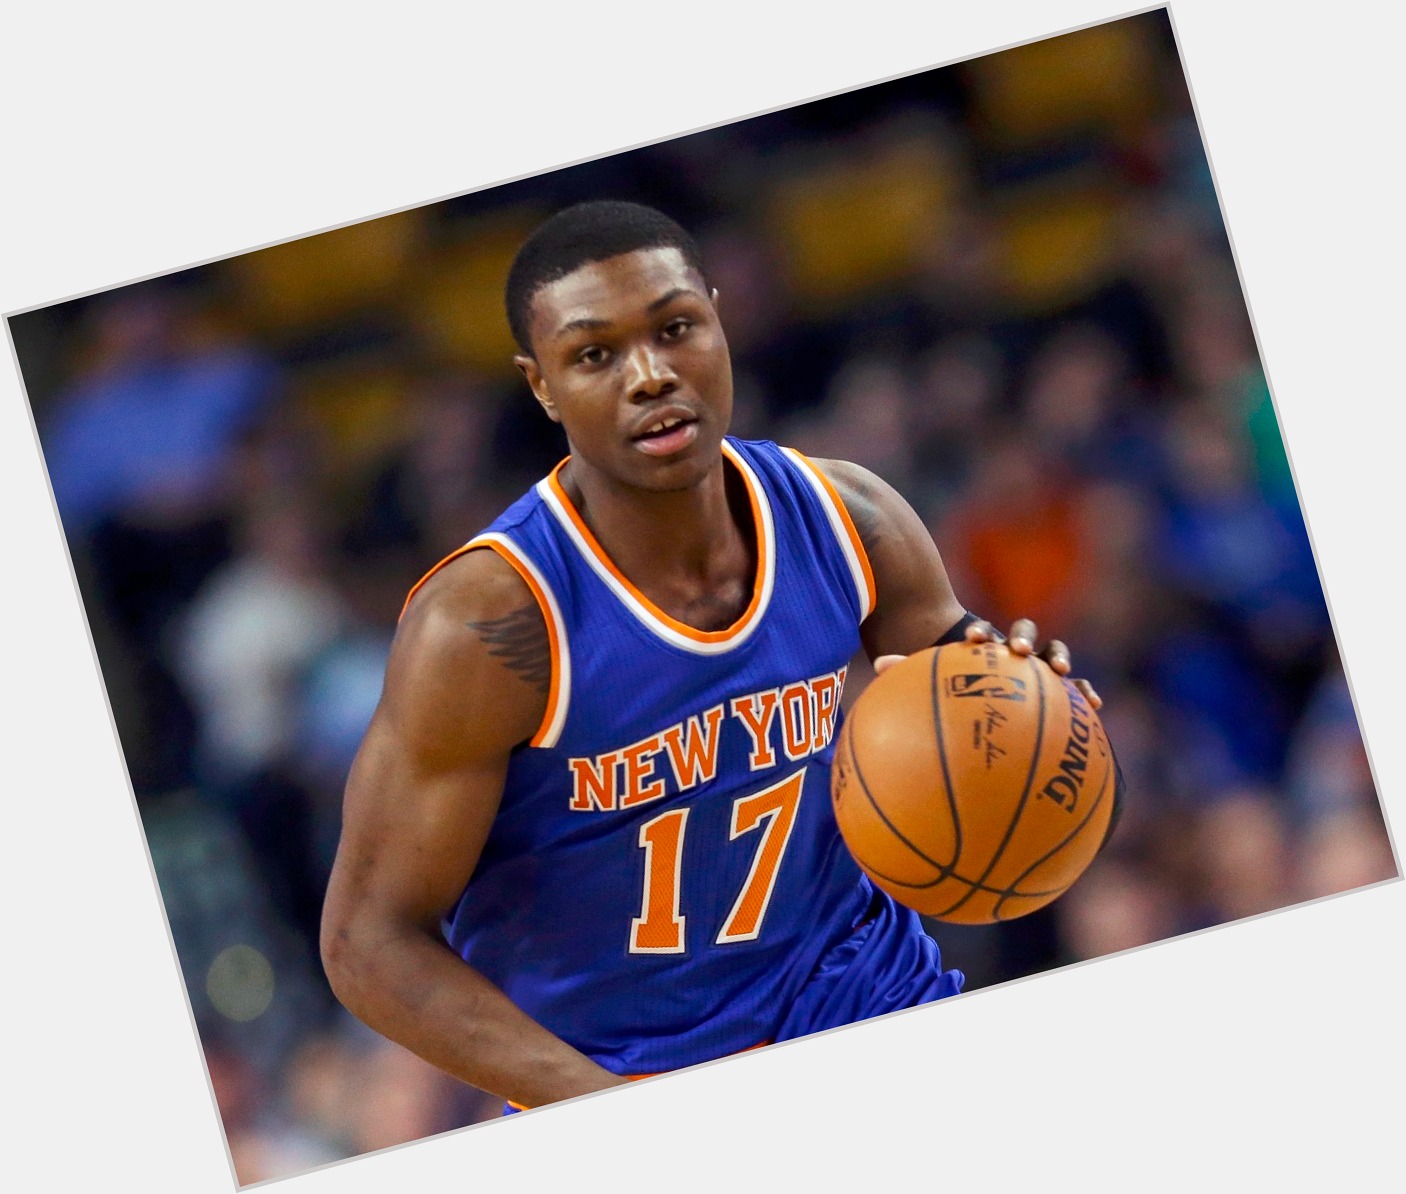 Https://fanpagepress.net/m/C/Cleanthony Early Sexy 0